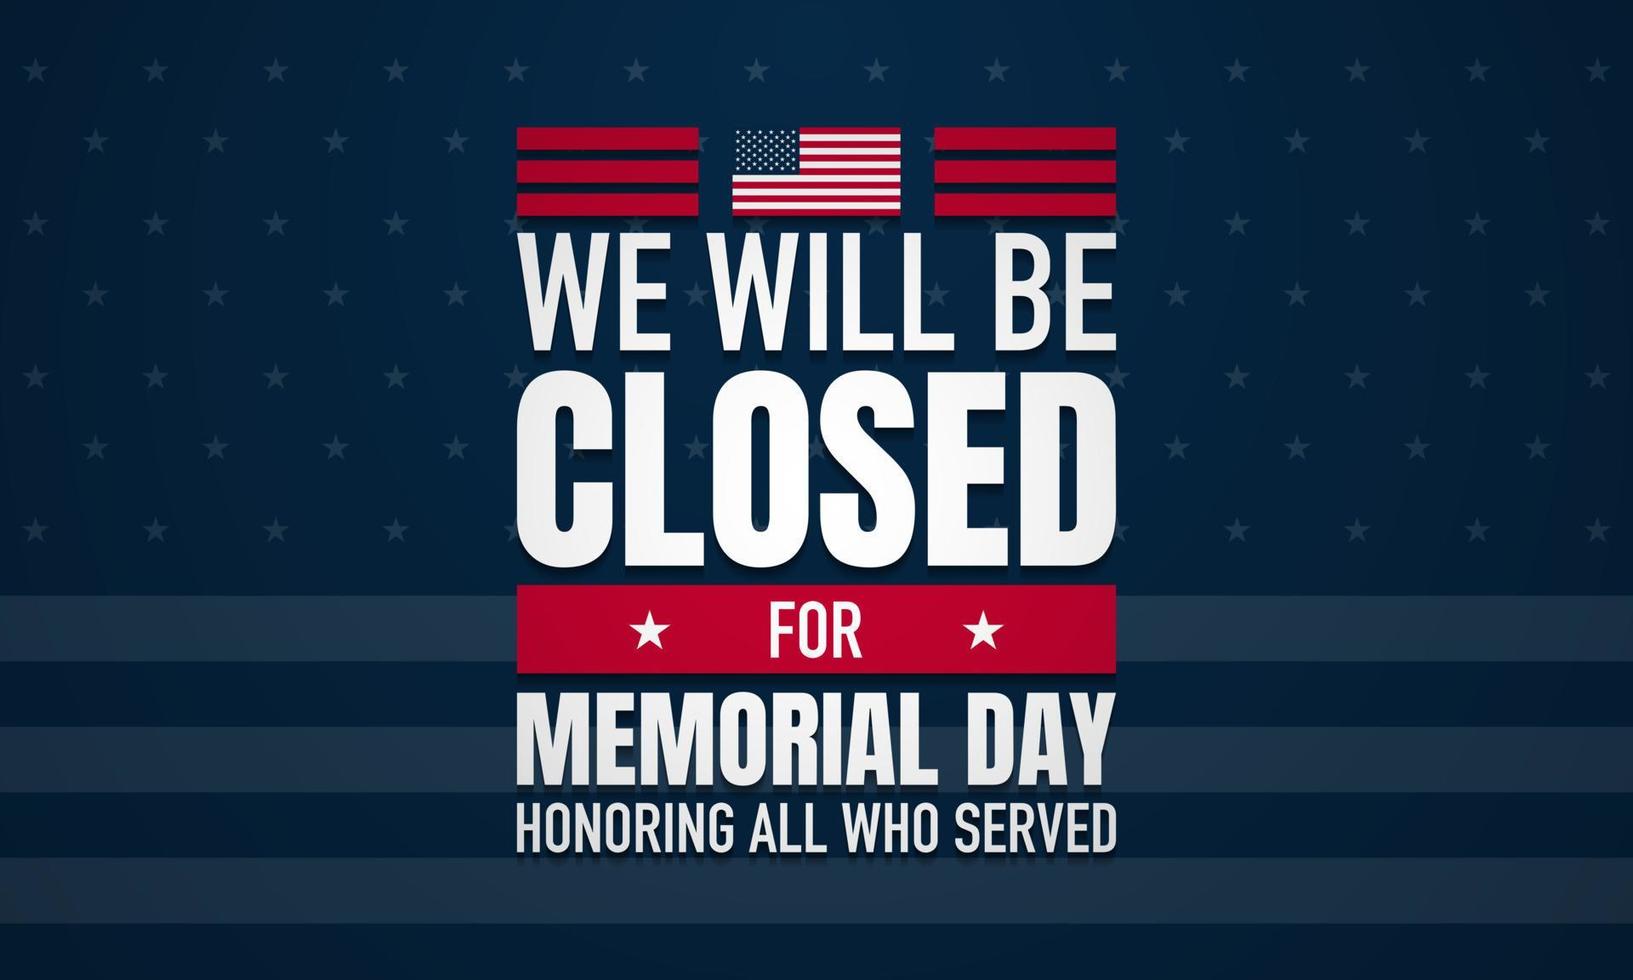 We will be closed for Memorial Day Background Design. Vector illustration.